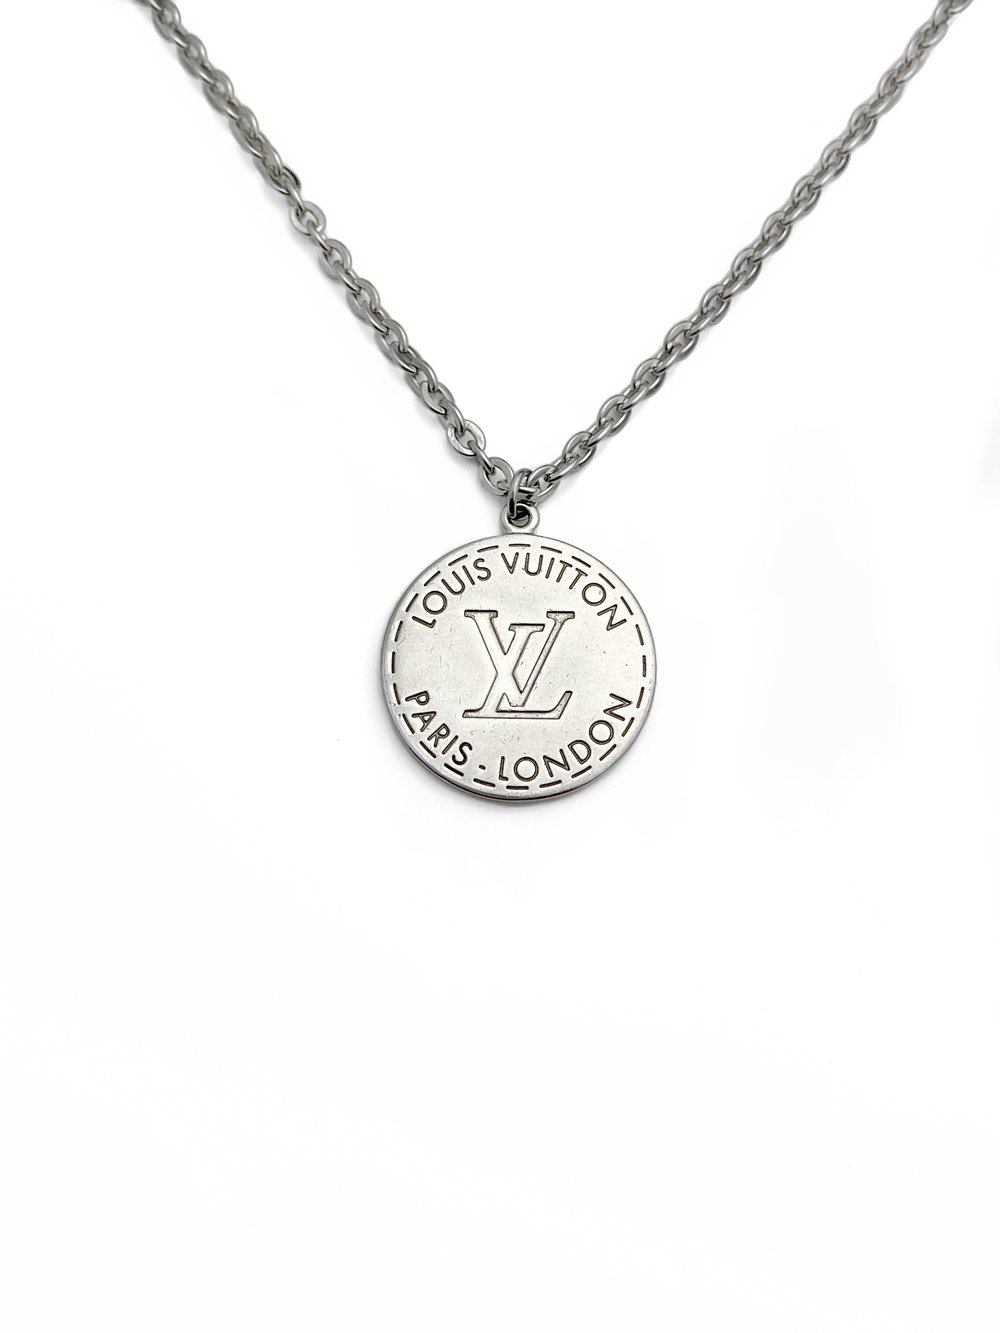 Authentic Louis Vuitton Repurposed Silver Trunks & Bags Necklace — LUXE  Reworked